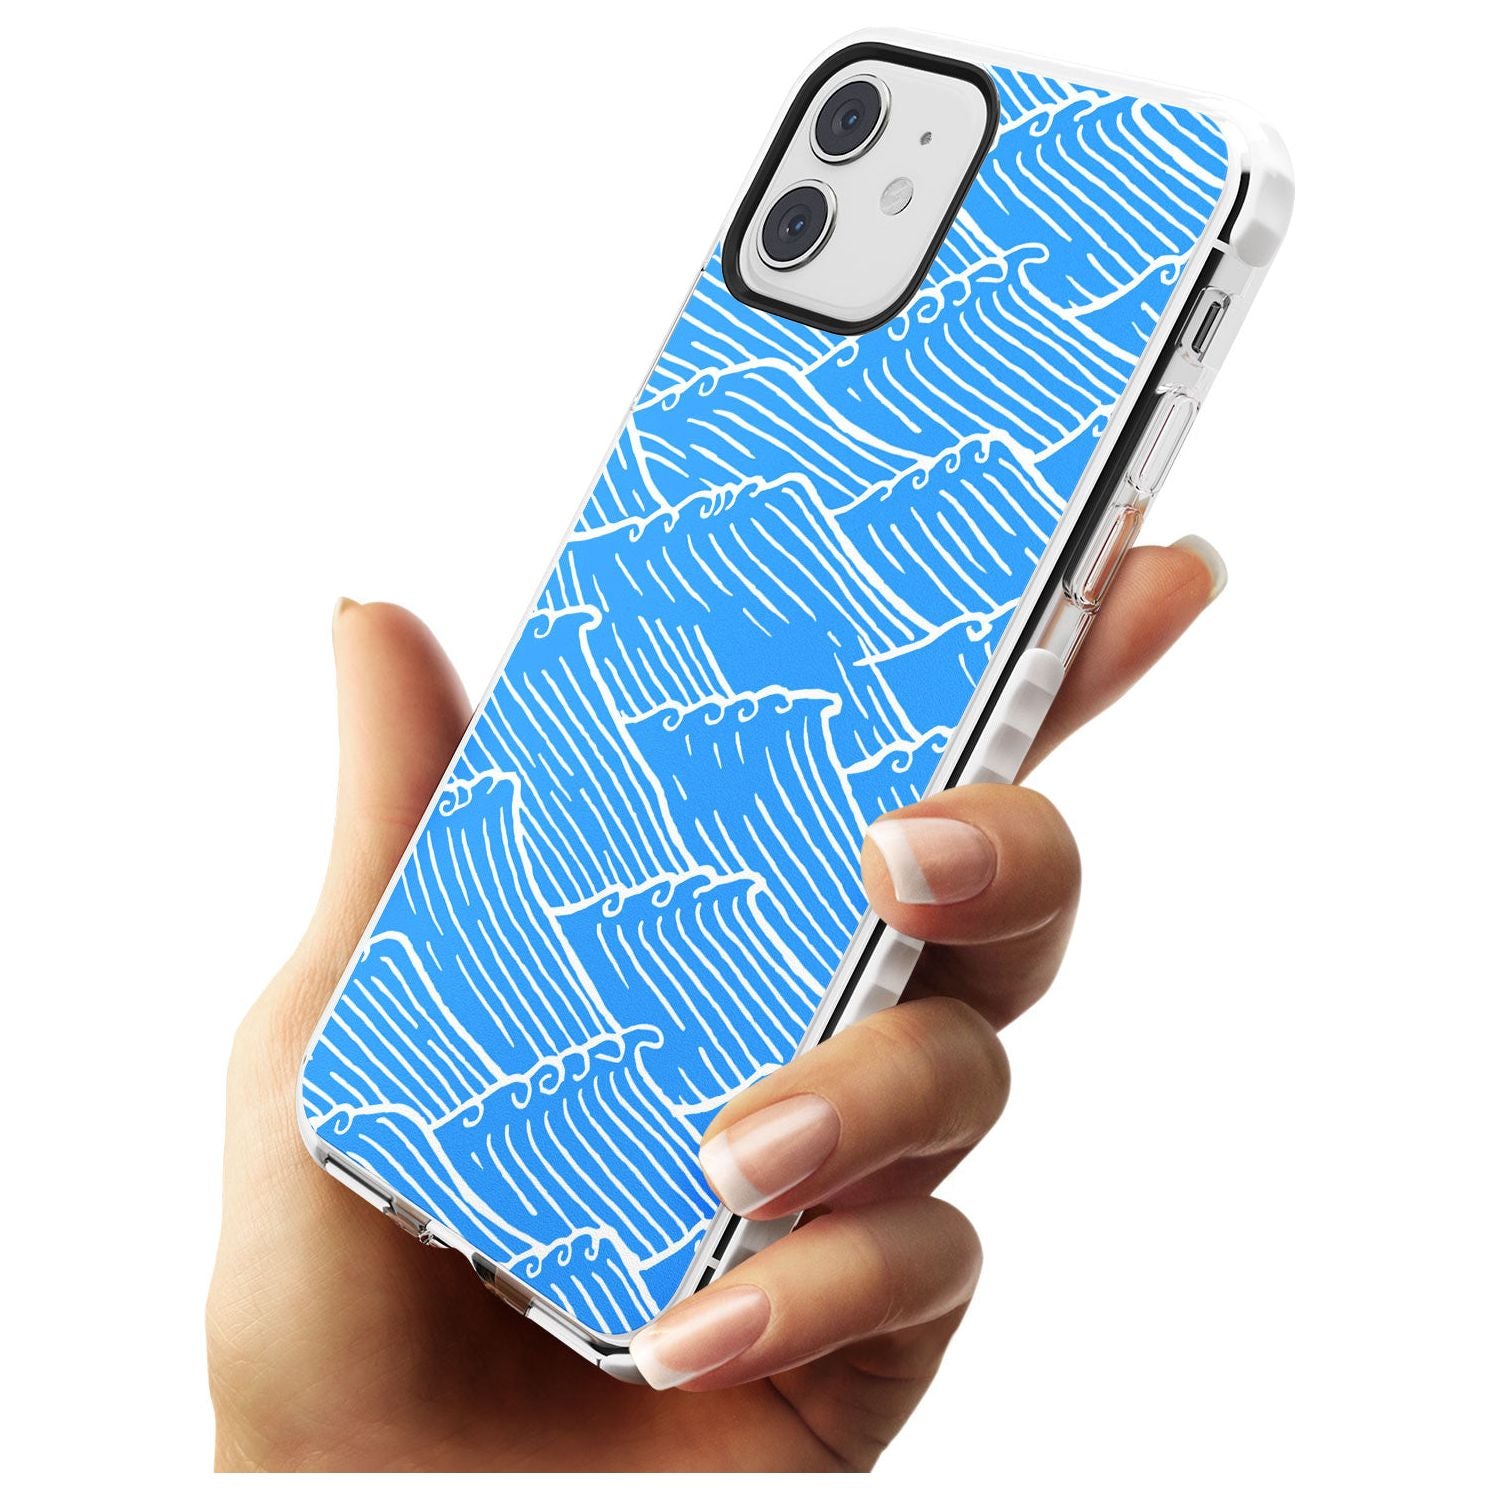 Waves Pattern Impact Phone Case for iPhone 11